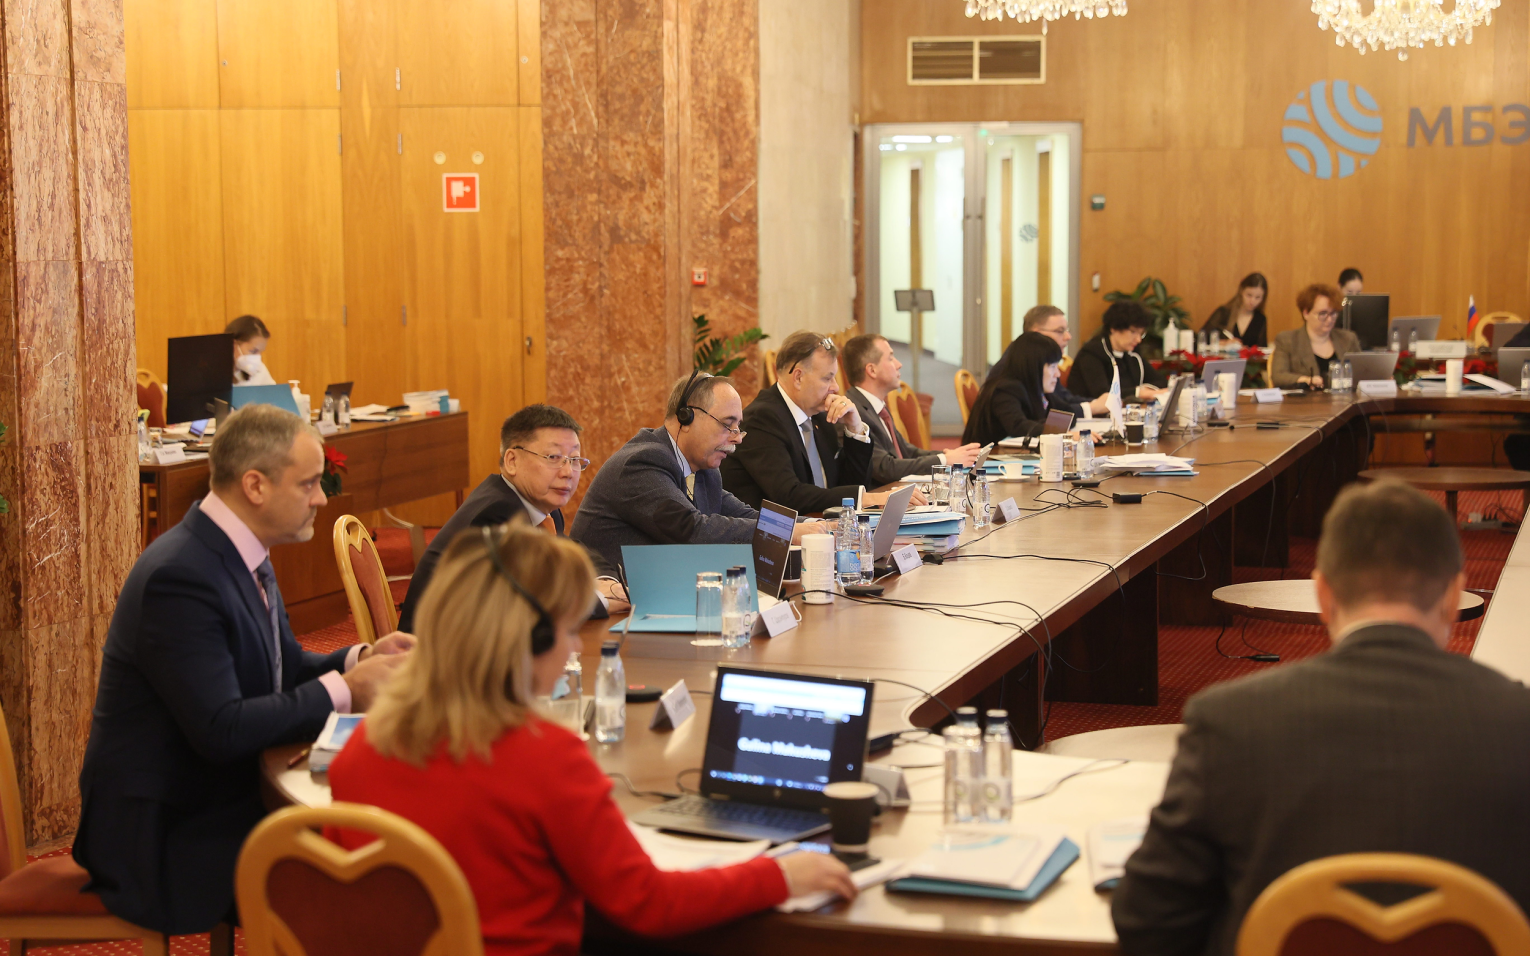 The 137th meeting of the IBEC Council